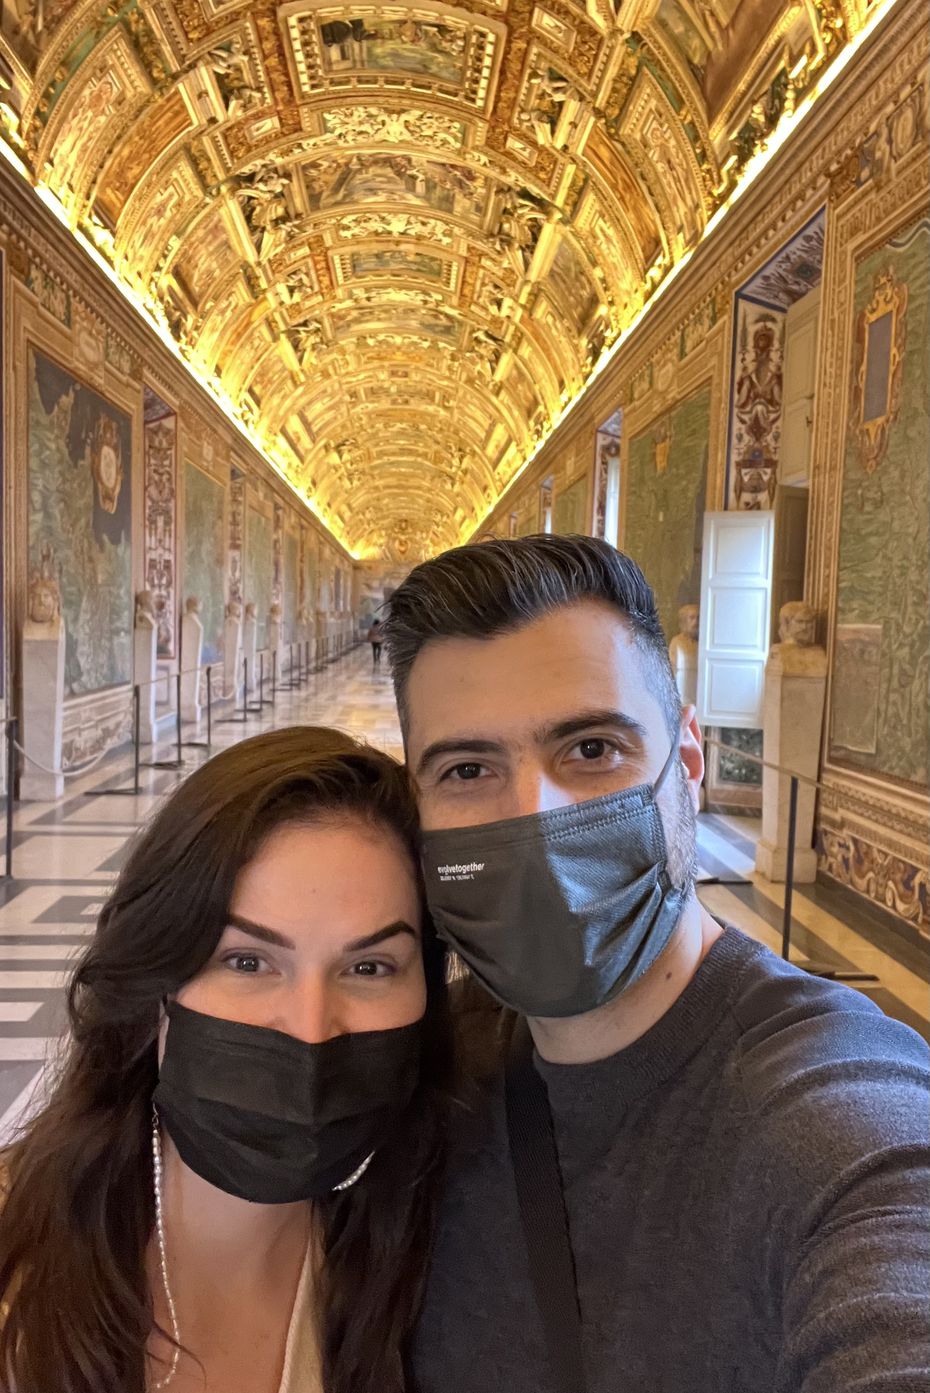 Cristina Allala and Michael Mawoad visit the Vatican Museum in Vatican City during a trip to Italy in December 2021. A few days later while in Florence, the couple was diagnosed with COVID-19 and were transported to a hotel in a nearby city for a 10-day quarantine.